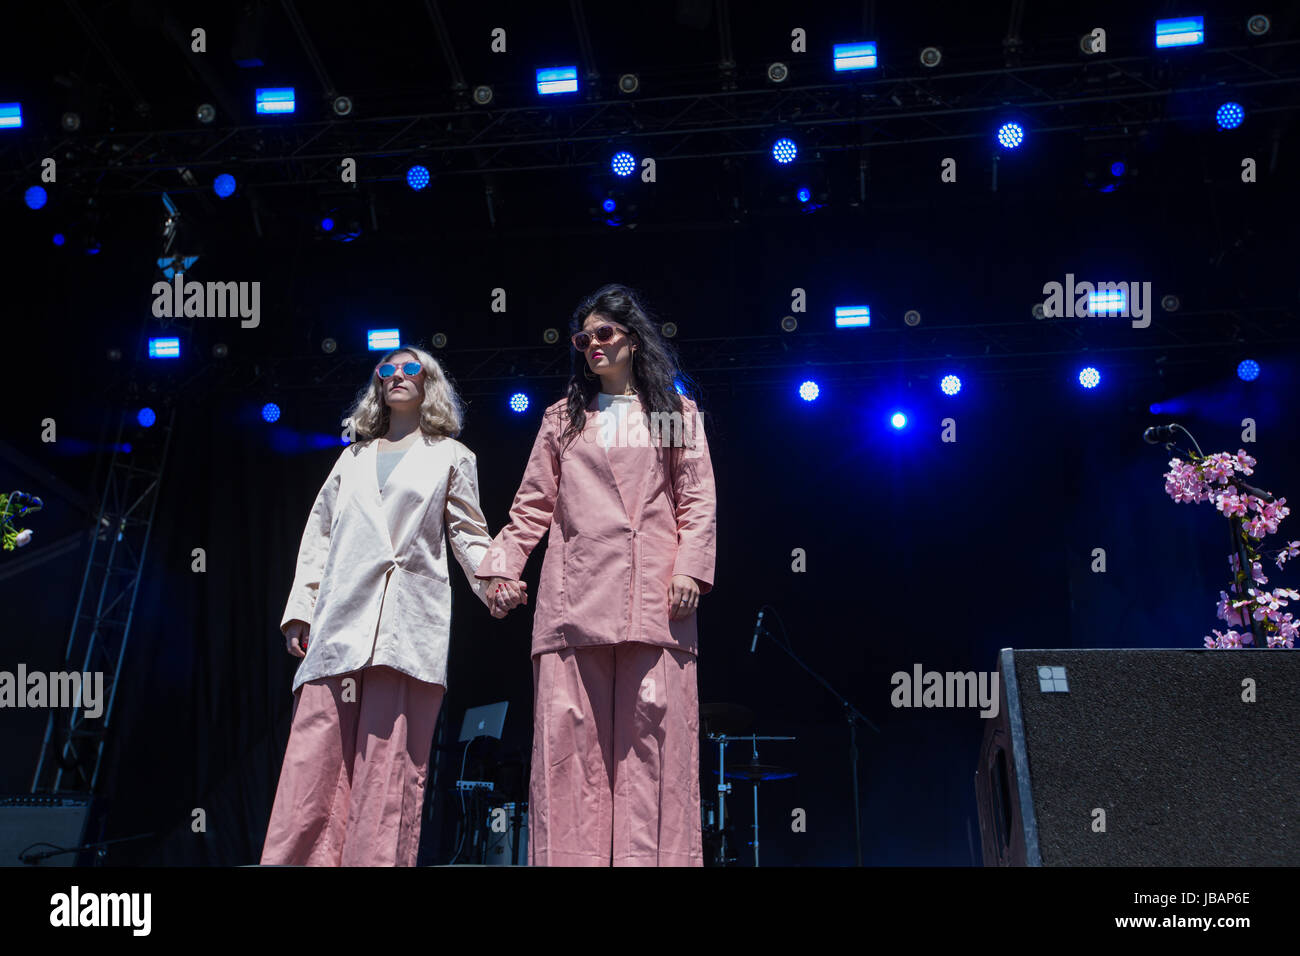 Overcoats performing at the 2017 Field Trip Music & Arts Festival in Toronto, Canada Stock Photo